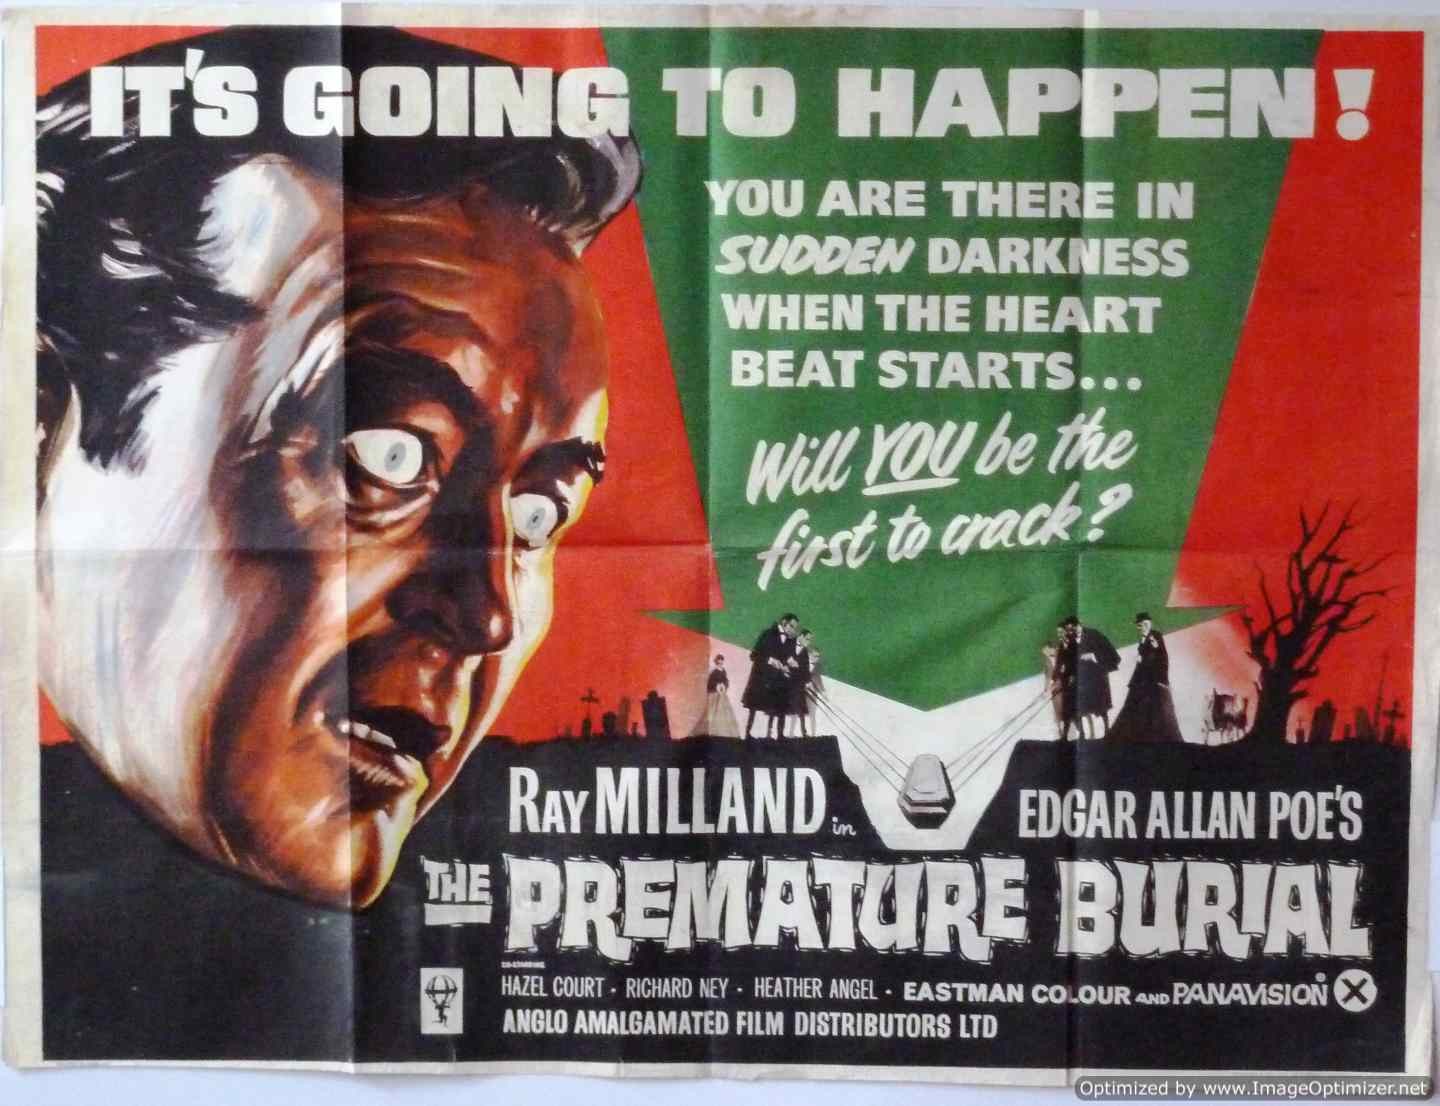 Extra Large Movie Poster Image for Premature Burial (#6 of 7)